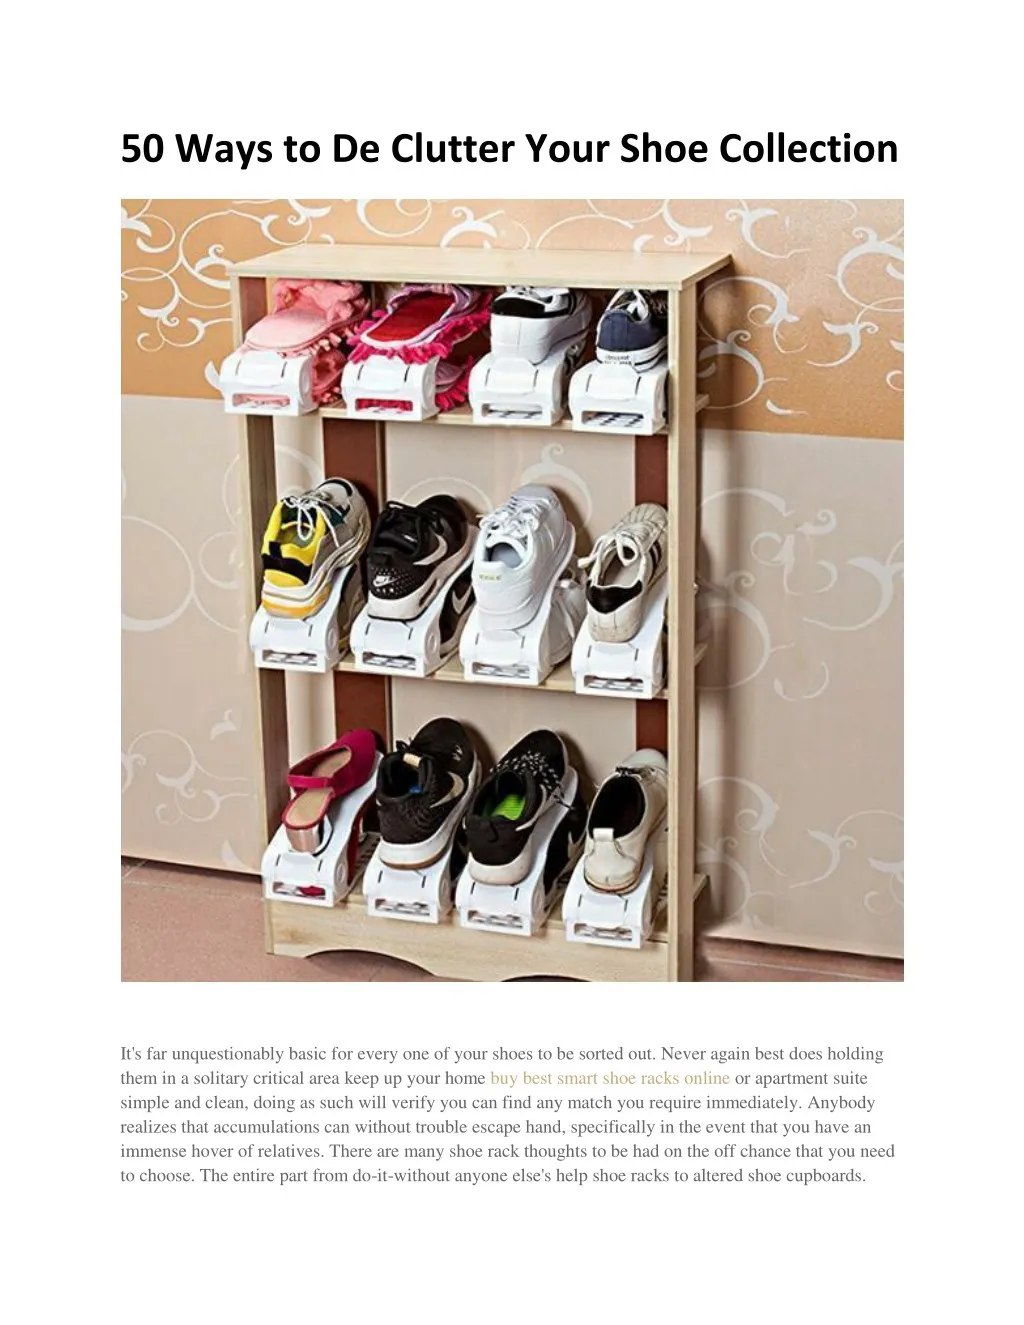 50 ways to de clutter your shoe collection